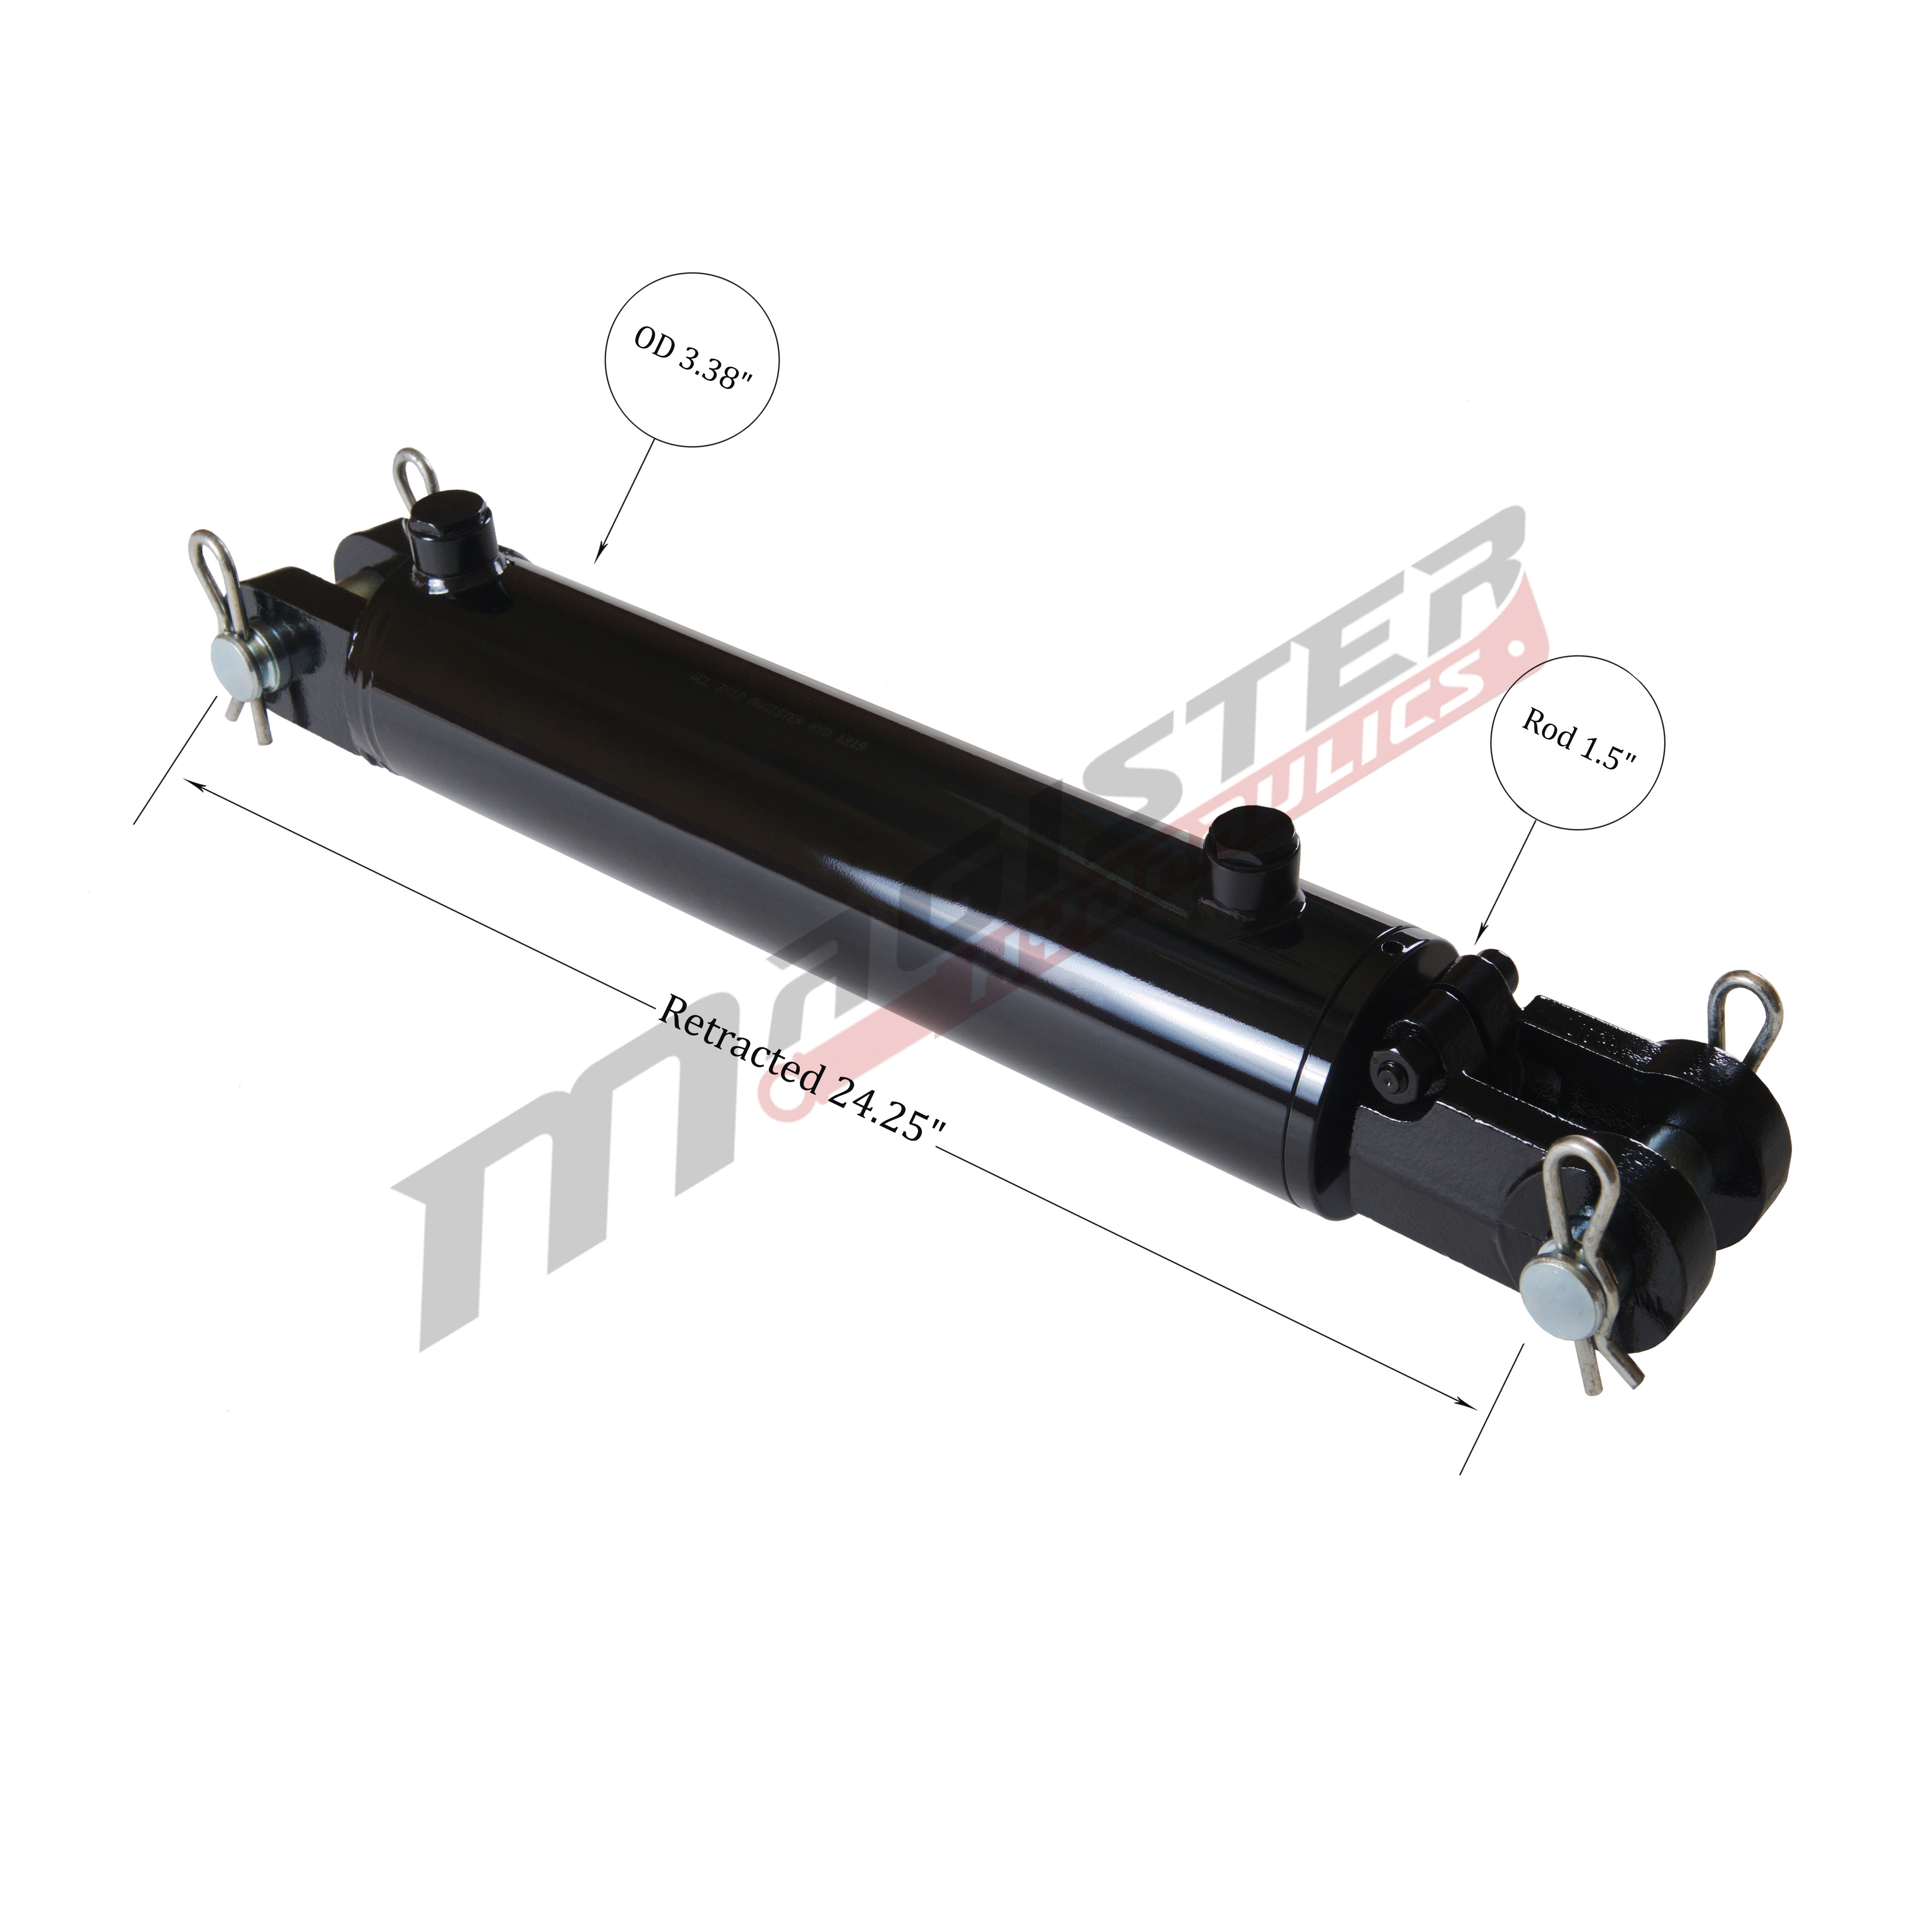 3 bore x 14 stroke hydraulic cylinder, welded clevis double acting cylinder | Magister Hydraulics